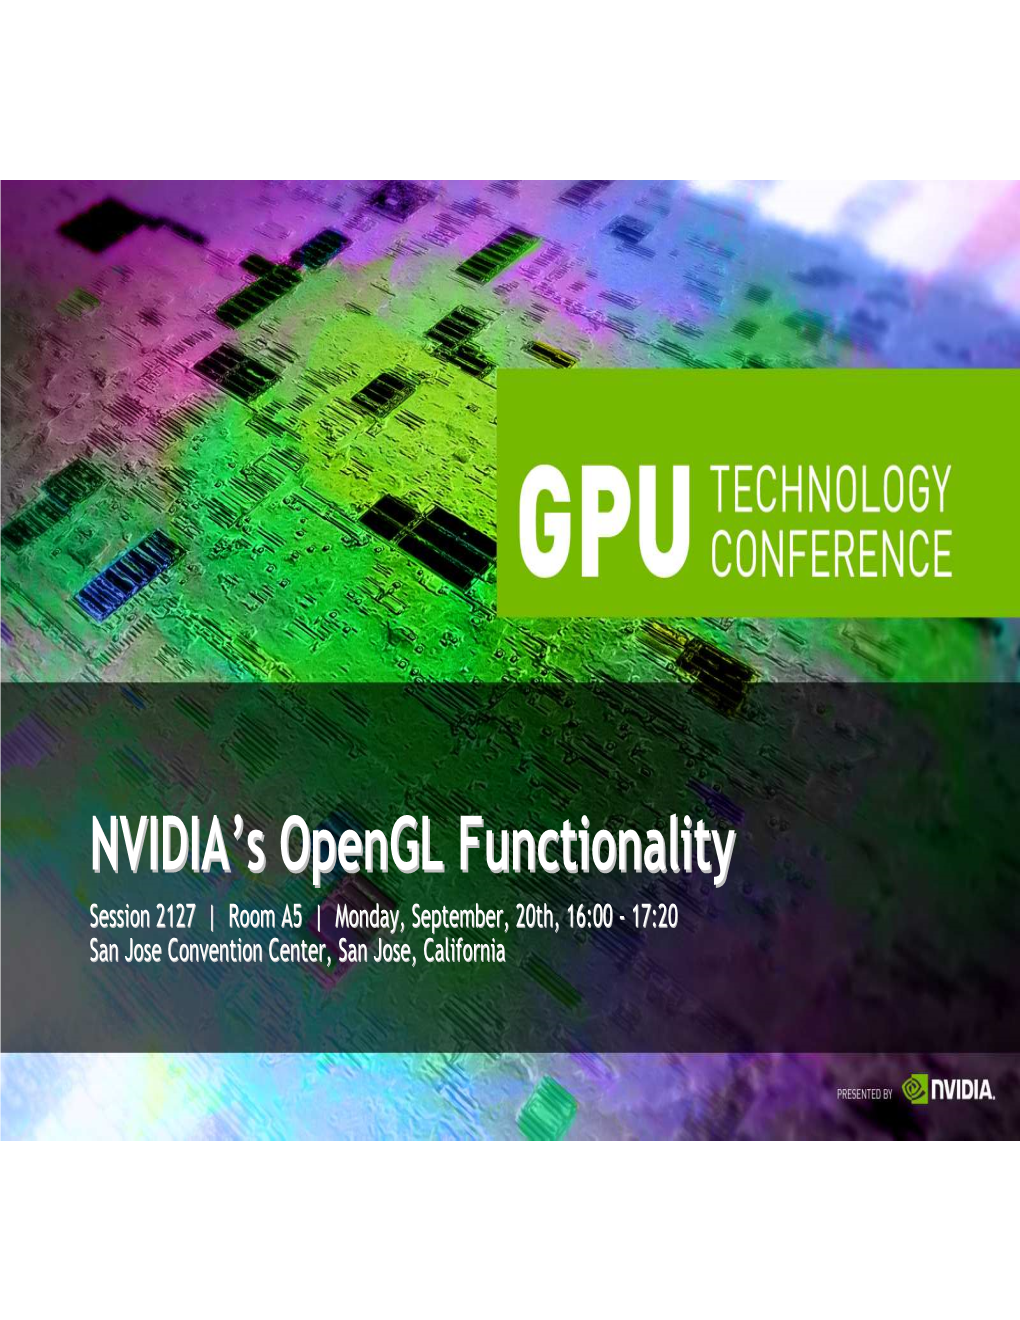 NVIDIA's Opengl Functionality